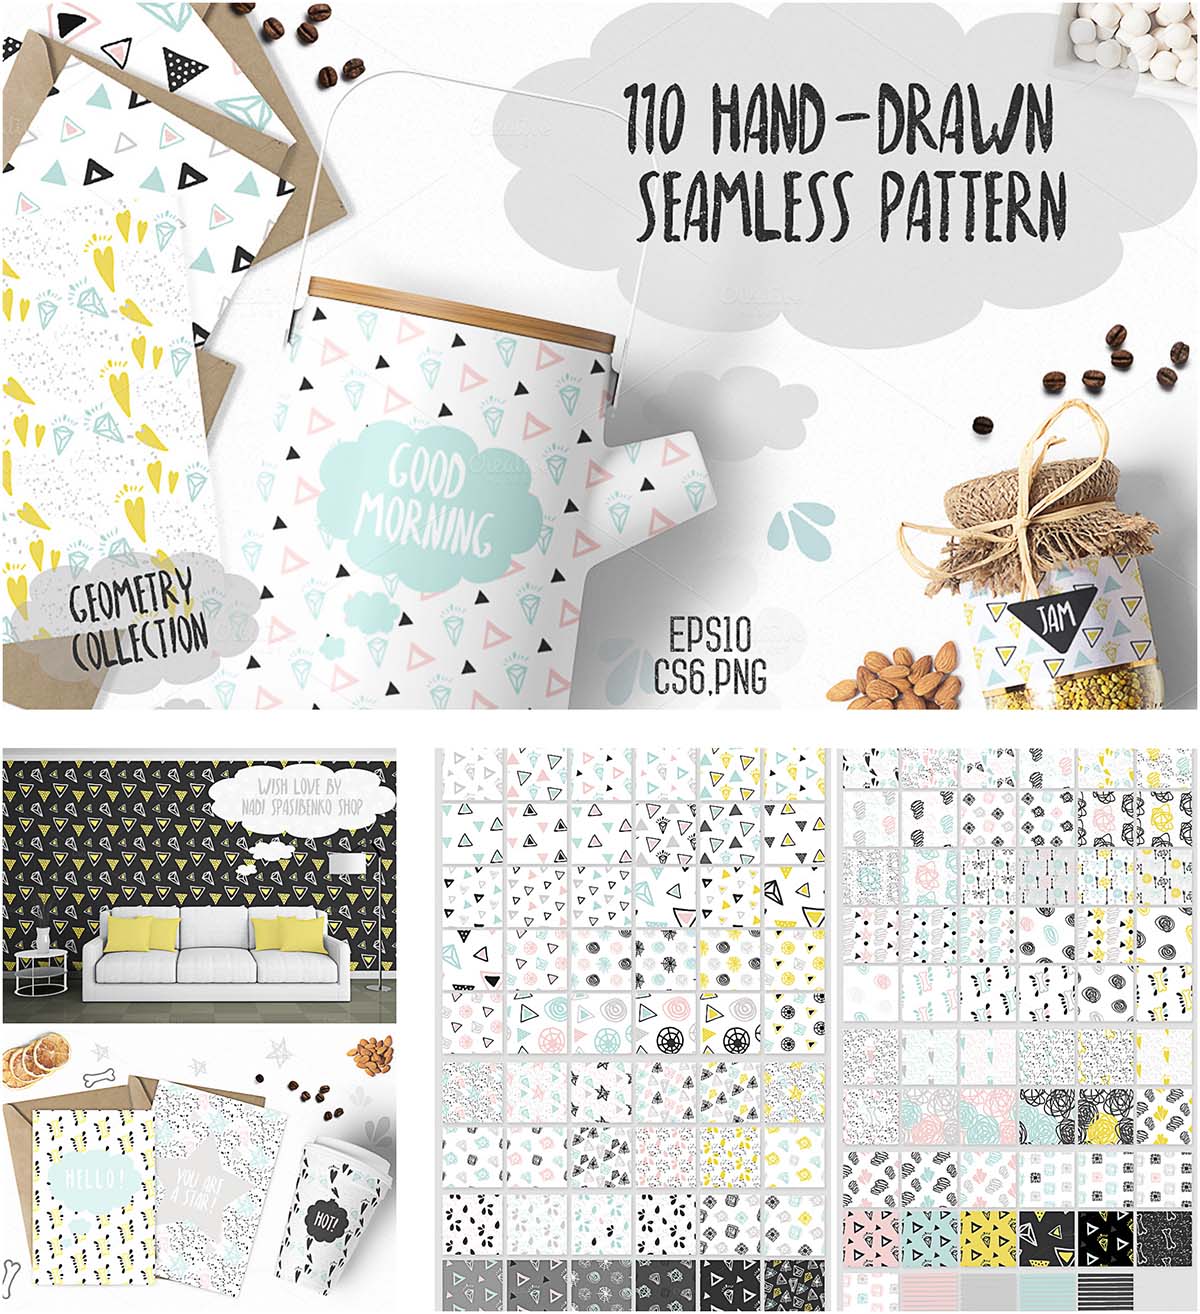 110 Hand drawn seamless patterns collection